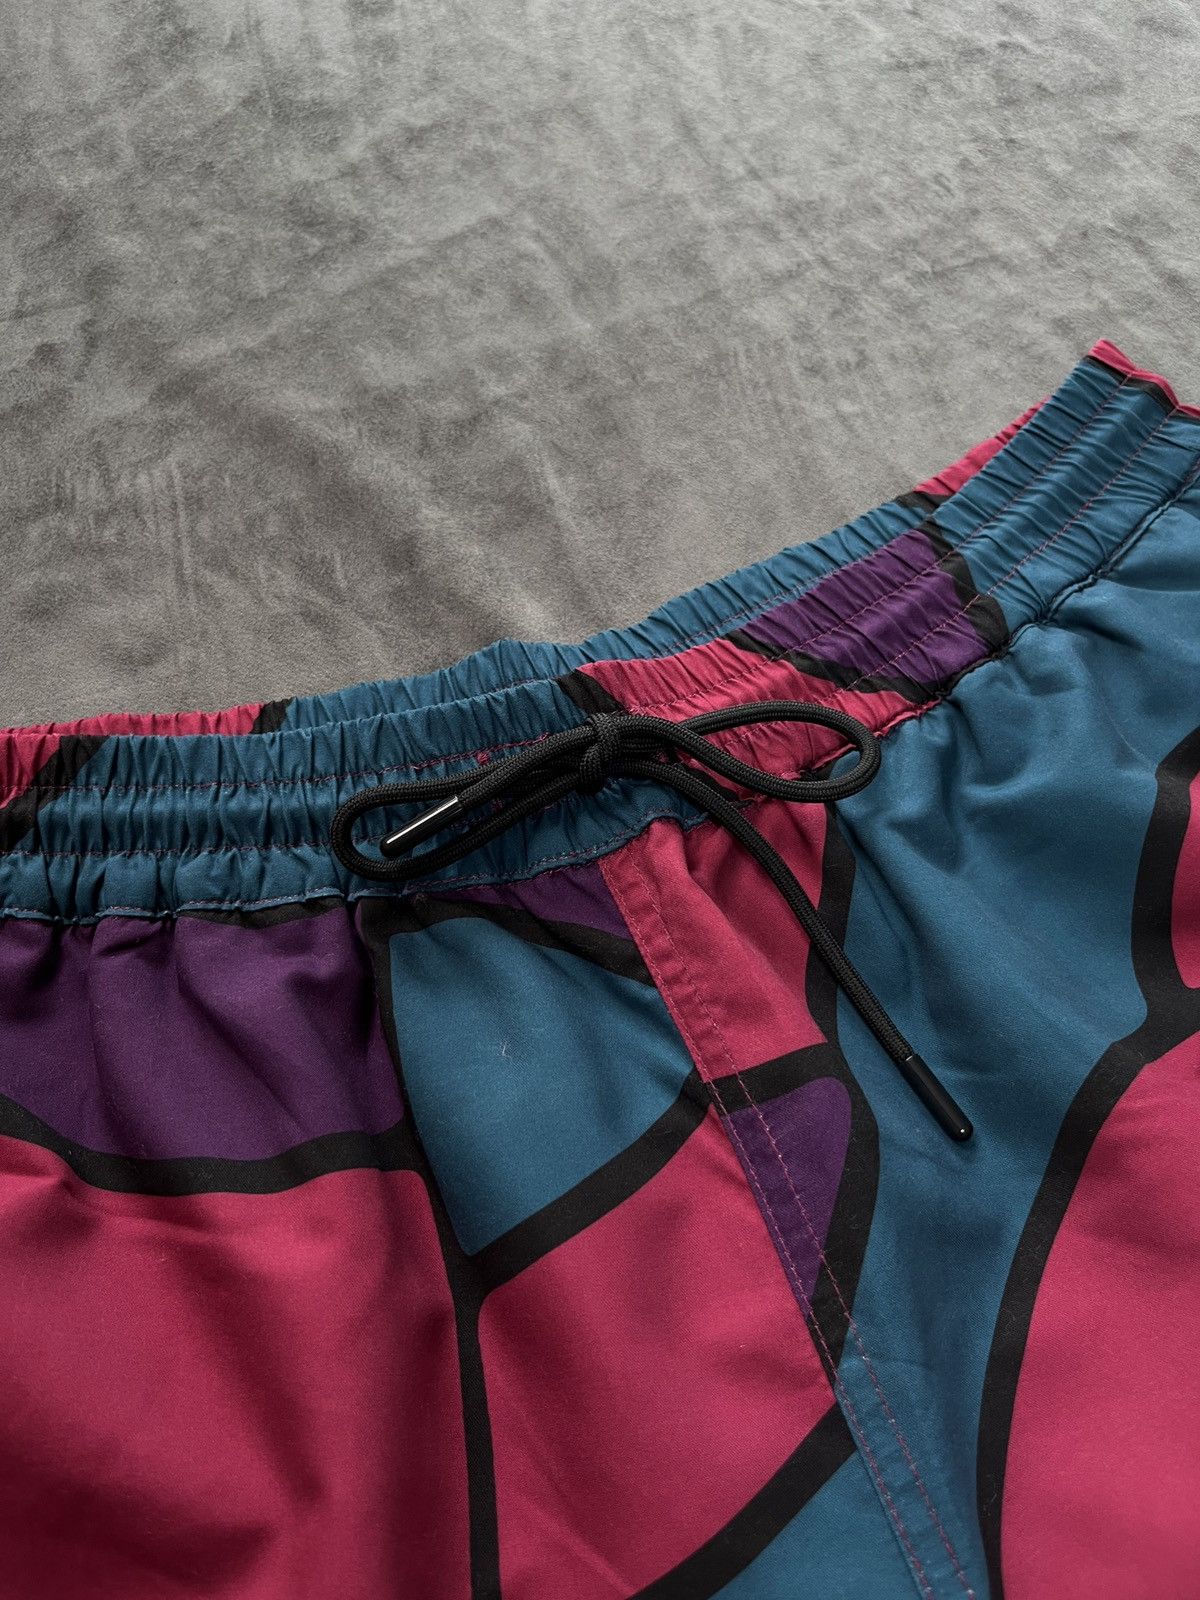 Hype - Deadstock By Parra Mountain Waves Shorts Multi Large - 3